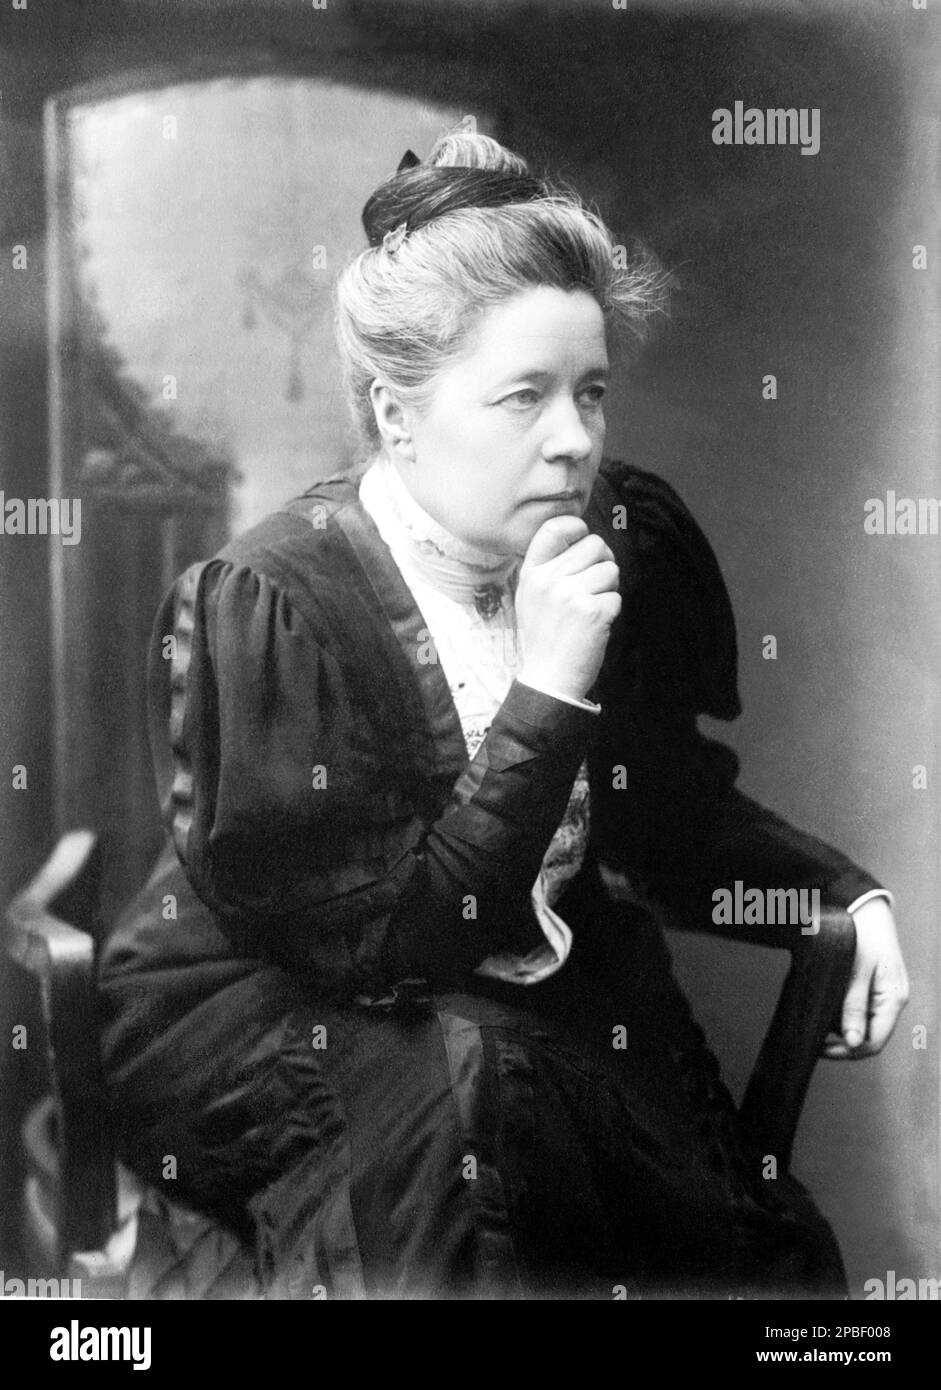 The writer NOBEL award winner Prize for Literature in 1909   SELMA LAGERLOFF (  Lagerlof - 1858 - 1940 ) . Was a Swedish author and the first woman writer to win the Nobel Prize in Literature. Known internationally for Nils Holgerssons underbara resa genom Sverige (a story for children, in the most common translation The Wonderful Adventures of Nils, but the literal translation would be ' Nils Holgersson's Wonderful Journey Through Sweden '), she was awarded the Nobel Prize in 1909 'in appreciation of the lofty idealism, vivid imagination and spiritual perception that characterize her writings Stock Photo